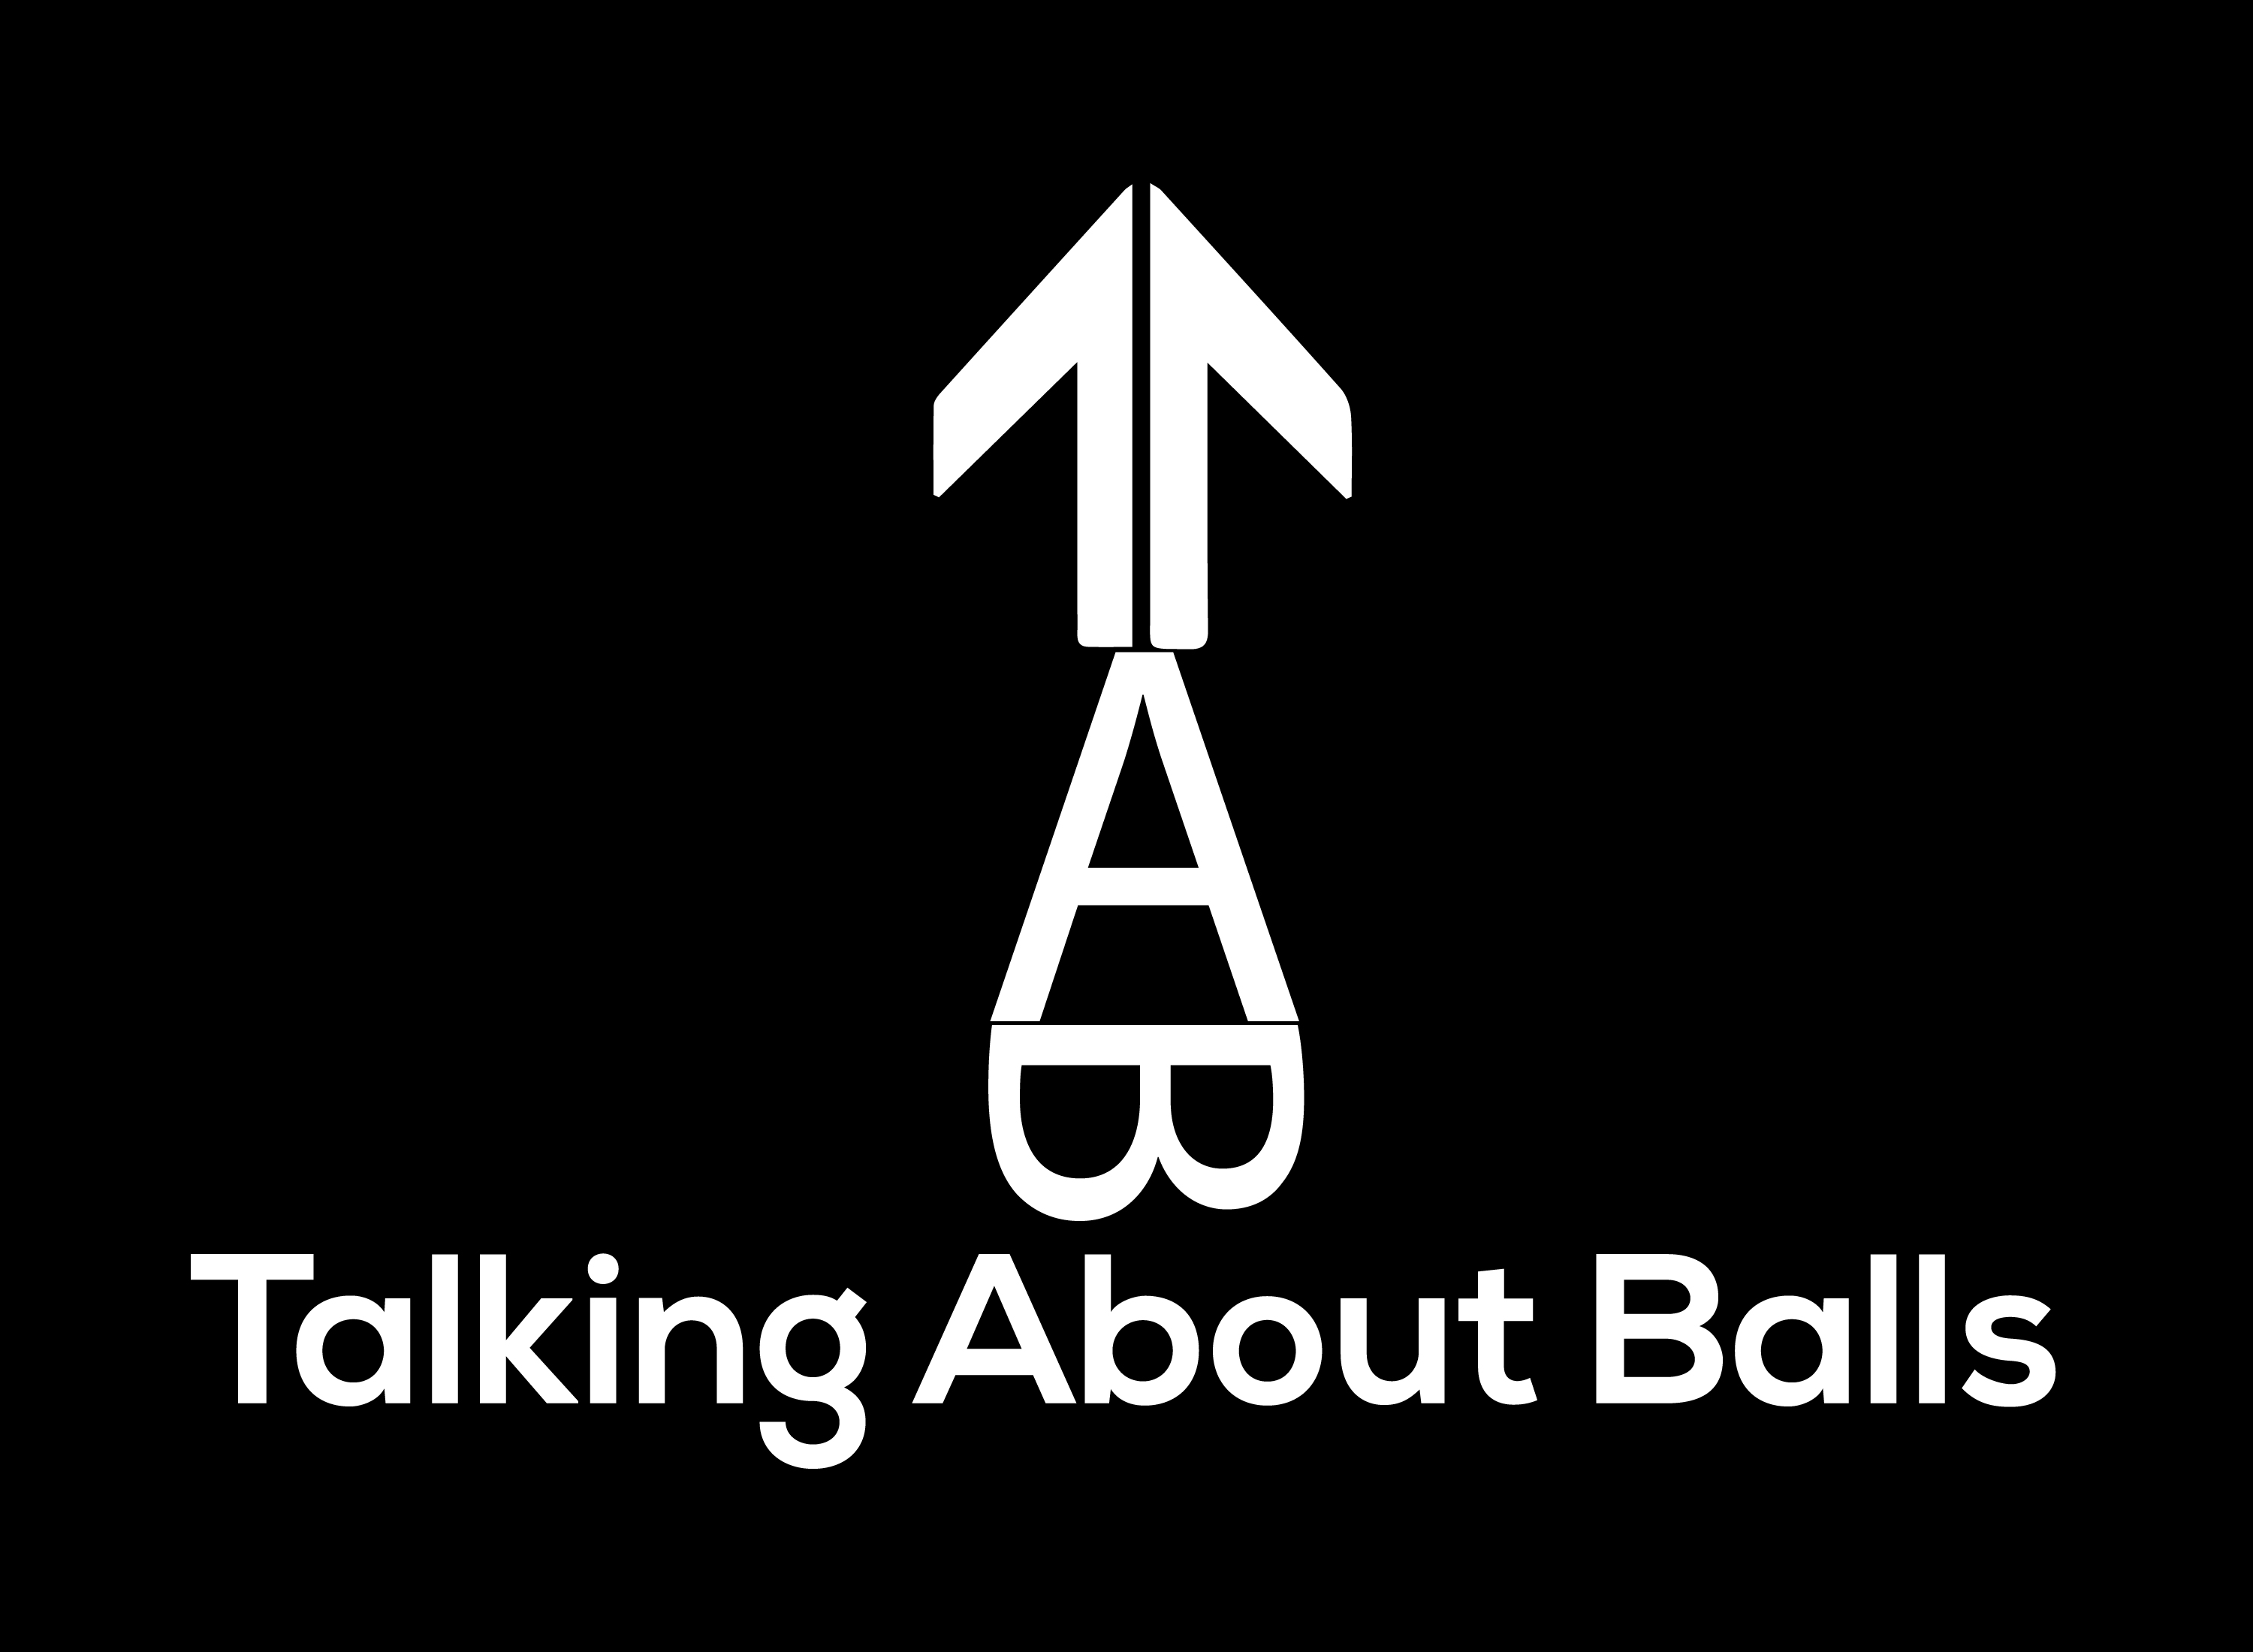 Talking About Balls!